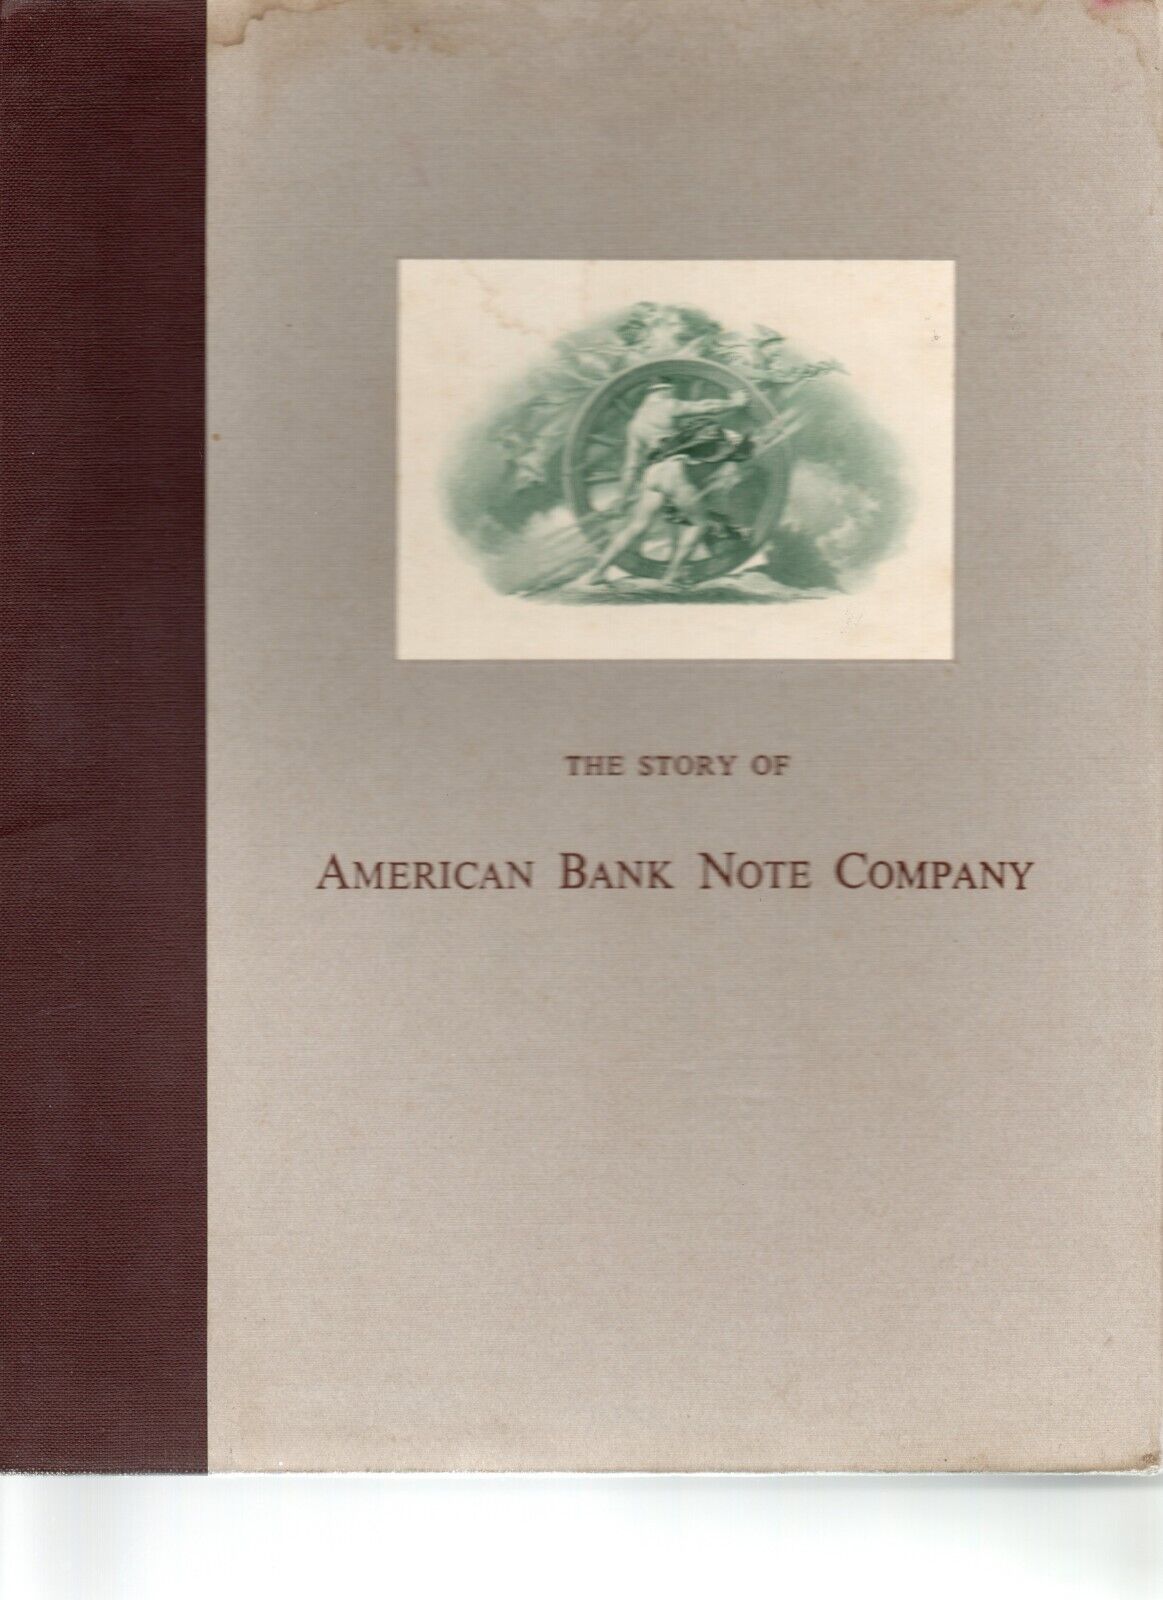 VINTAGE BOOK THE STORY OF AMERICAN BANK NOTE COMPANY BY GRIFFITHS 1959 1ST RARE